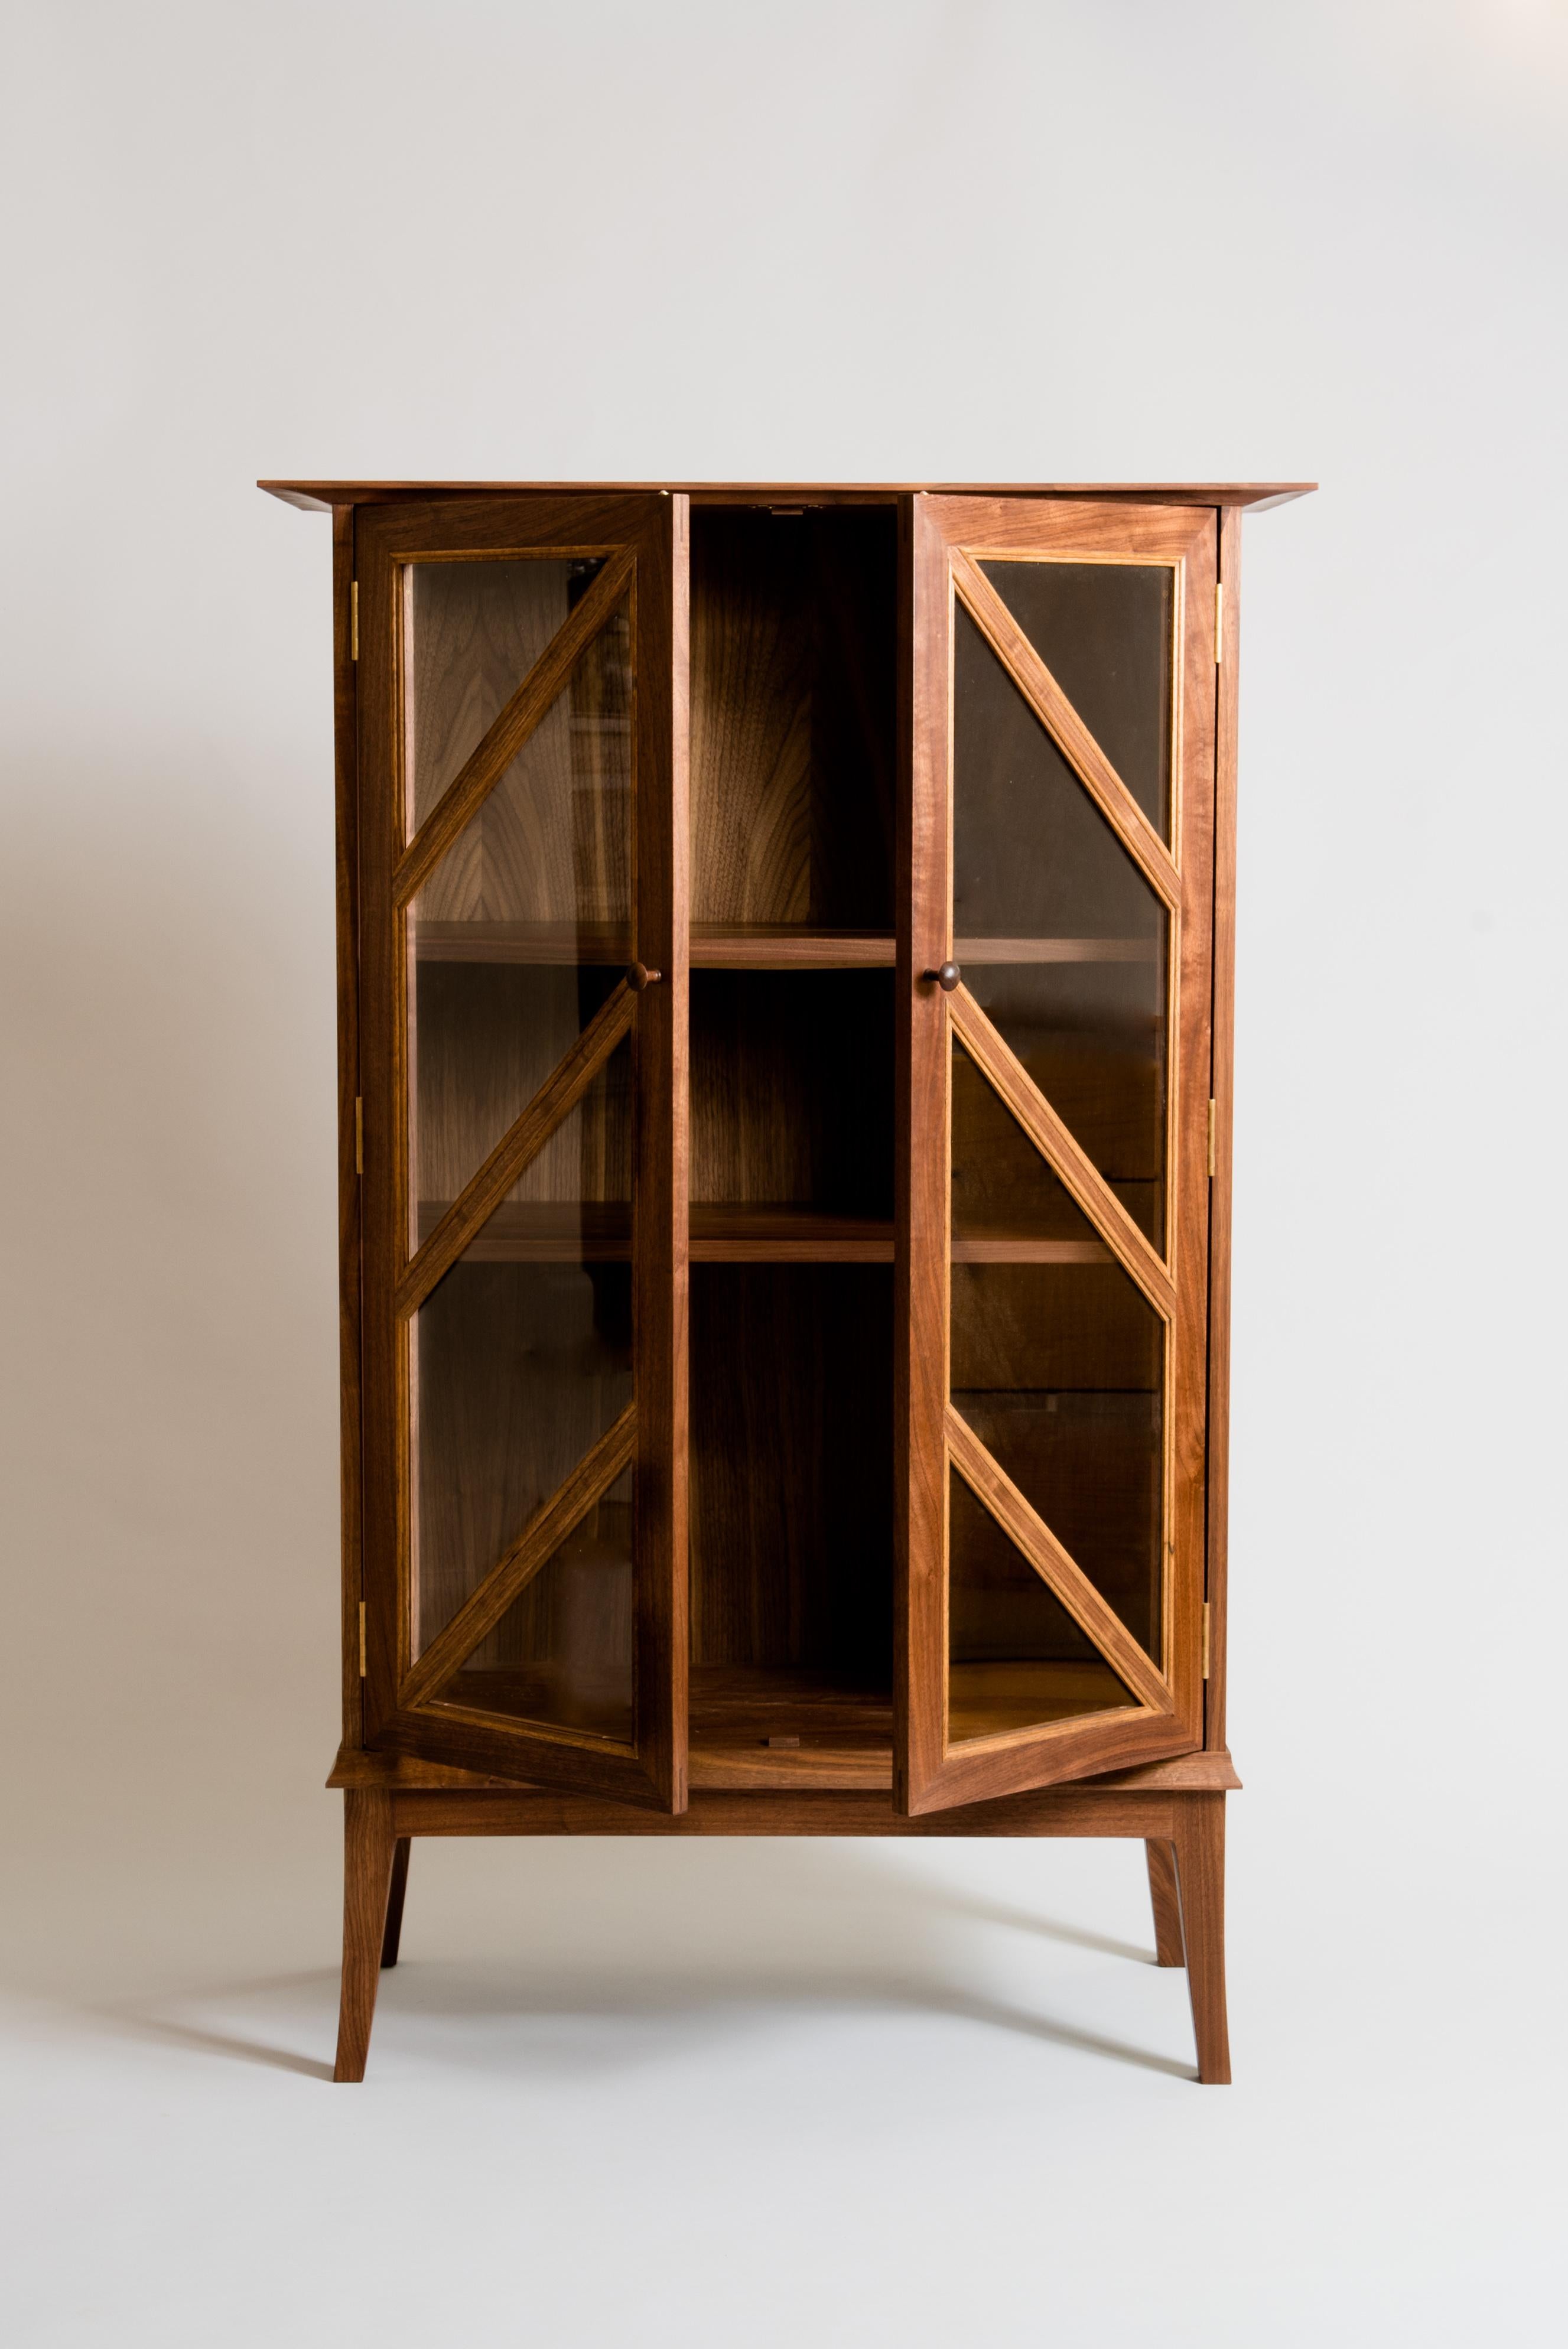 This cabinet is a clean, contemporary piece with traditional elements including a molding pattern unique to Meredith Hart Furniture over the glass doors. Originally designed to hold a wine collection, it could function as anything from a bookcase to